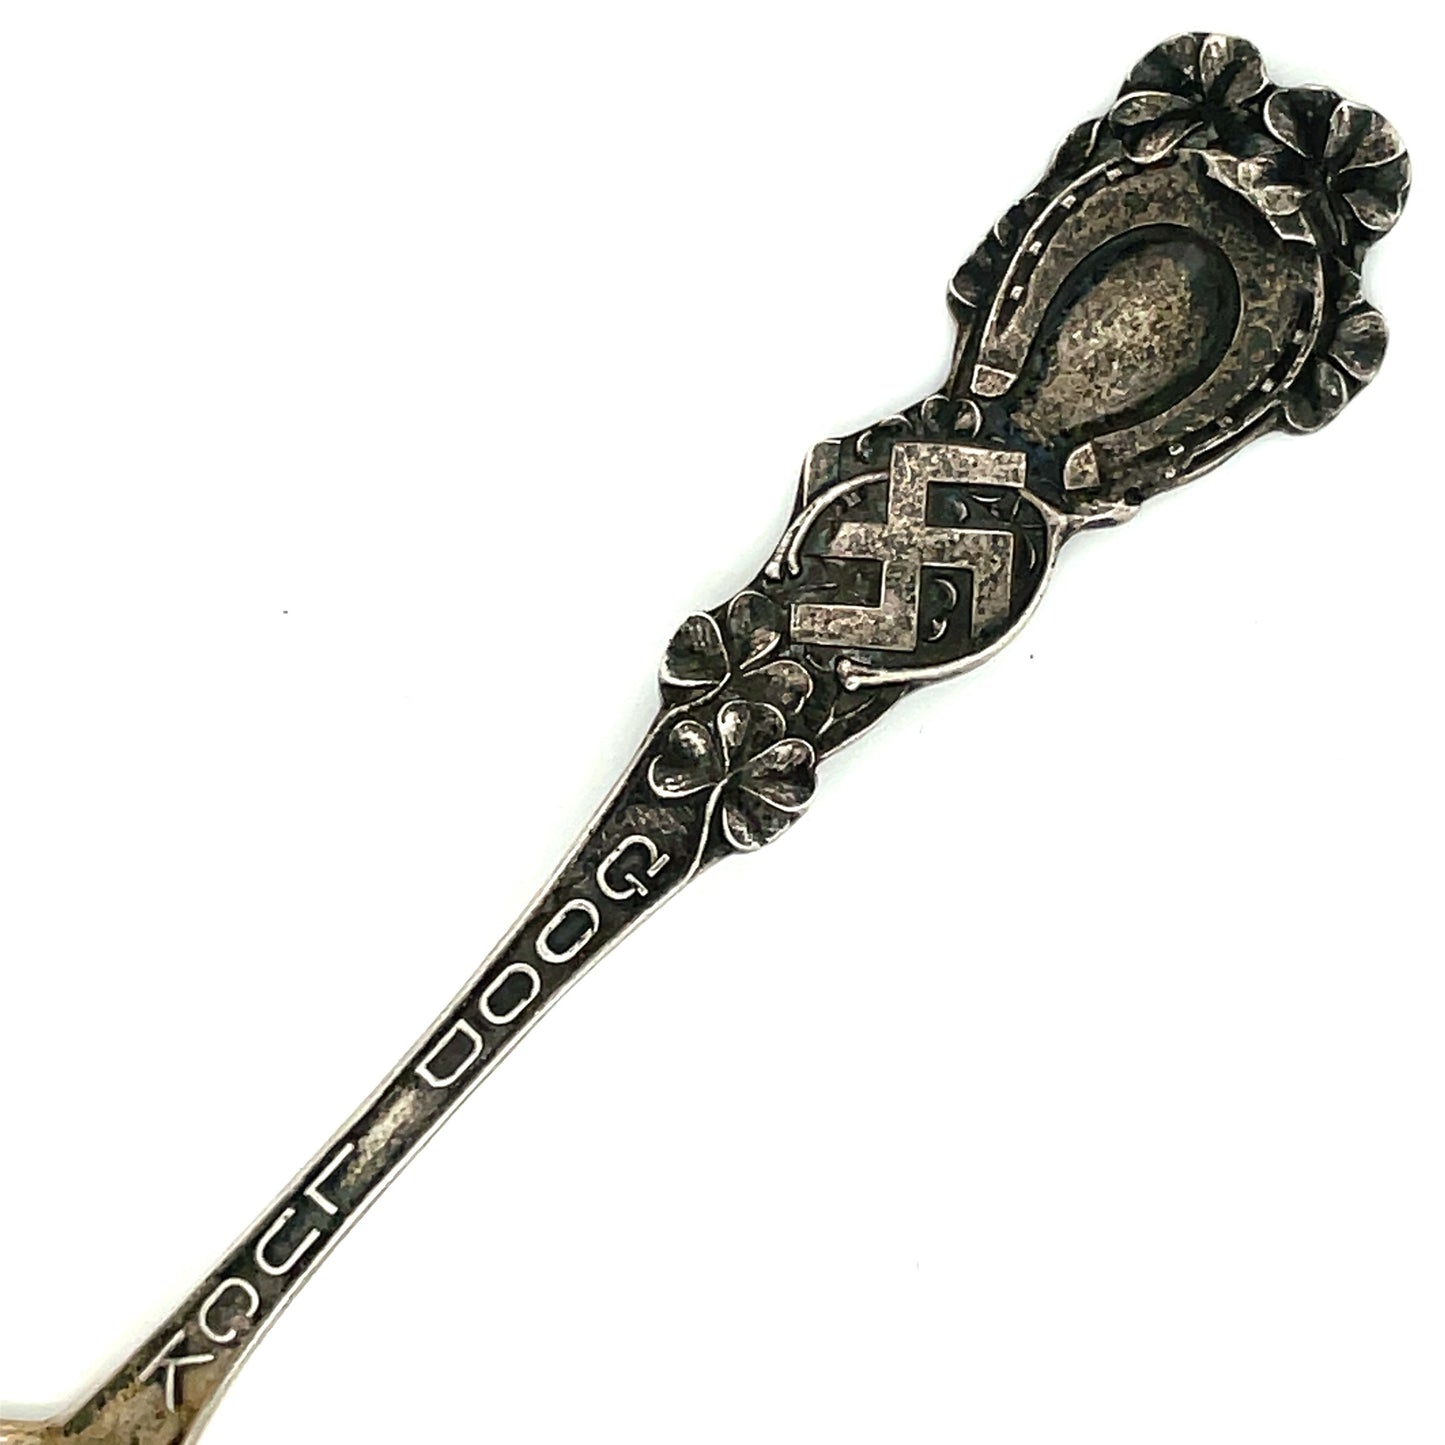 Sterling Silver Souvenir Spoon Good Luck Four Leaf Clover Horseshoe Whirling Logs